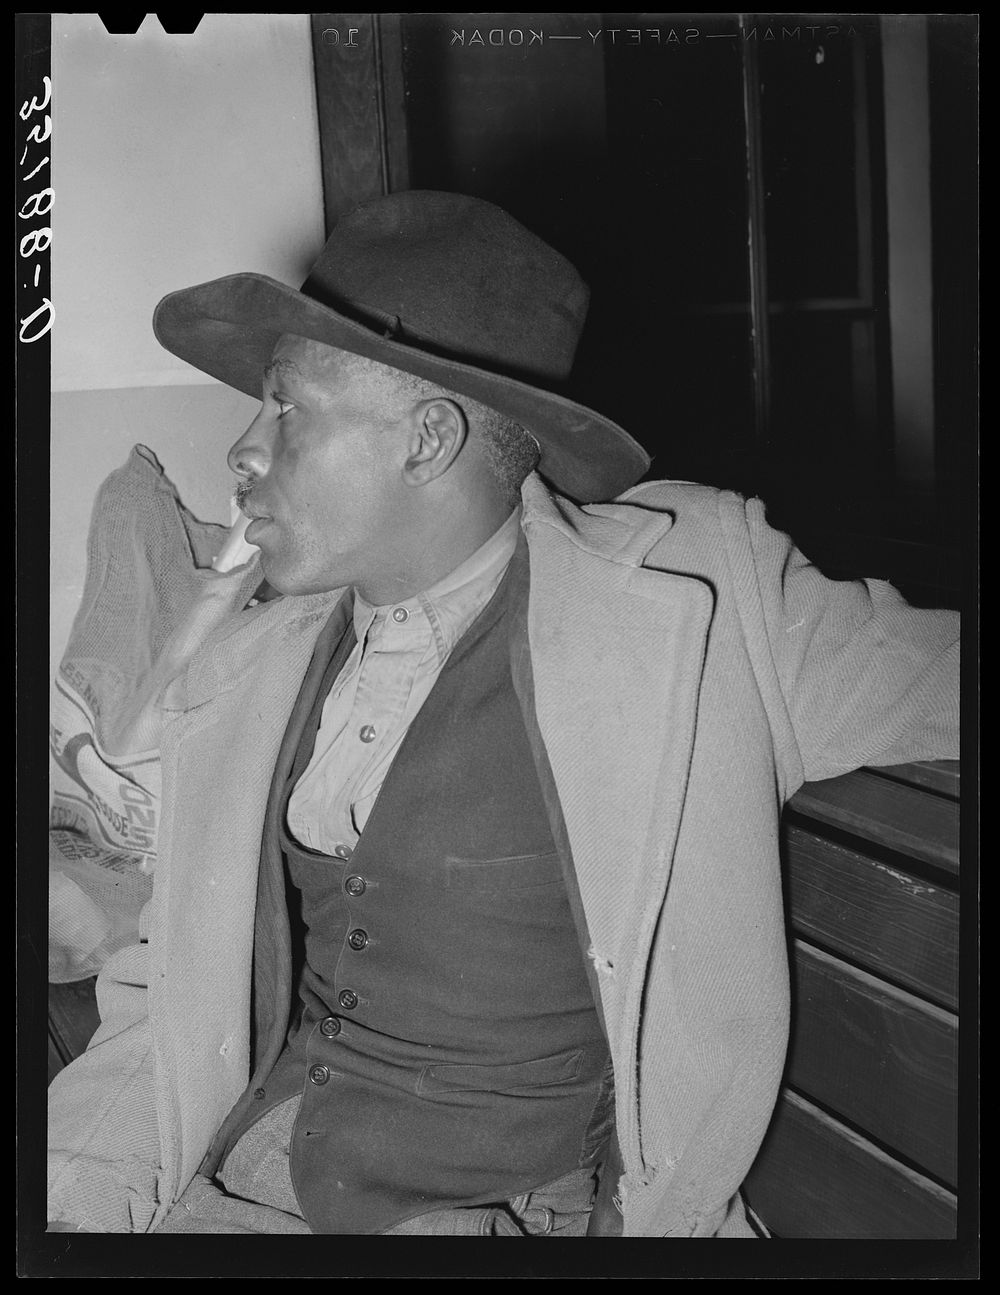  tenant farmer, member of UCAPAWA (United Cannery, Agricultural, Packing, and Allied Workers of America), at meeting in…